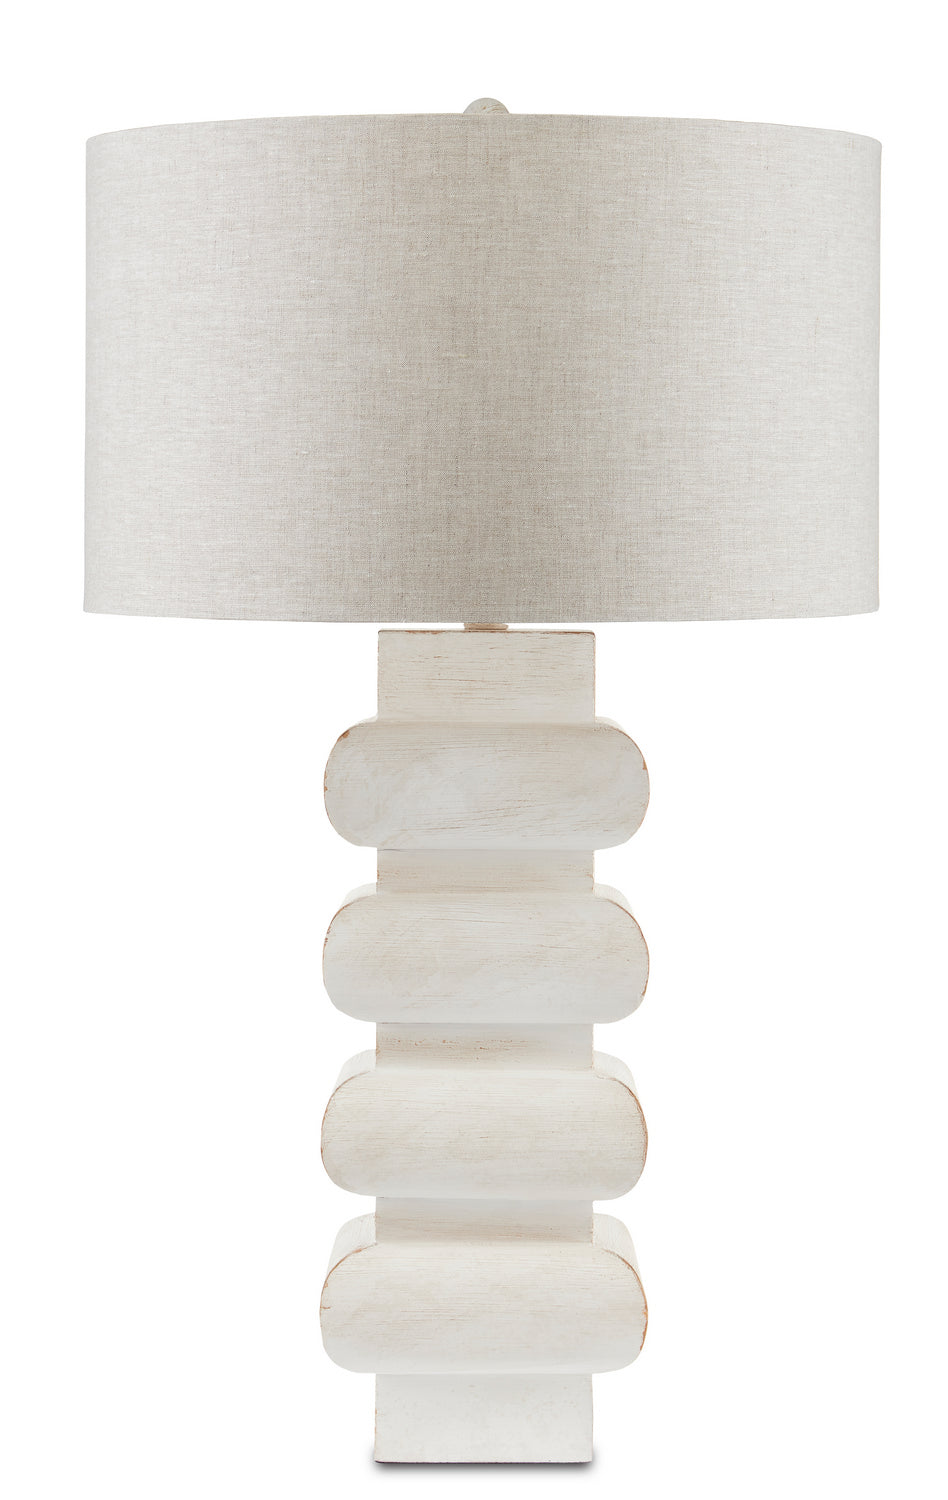 One Light Table Lamp from the Blondel collection in Whitewash/Antique Nickel finish